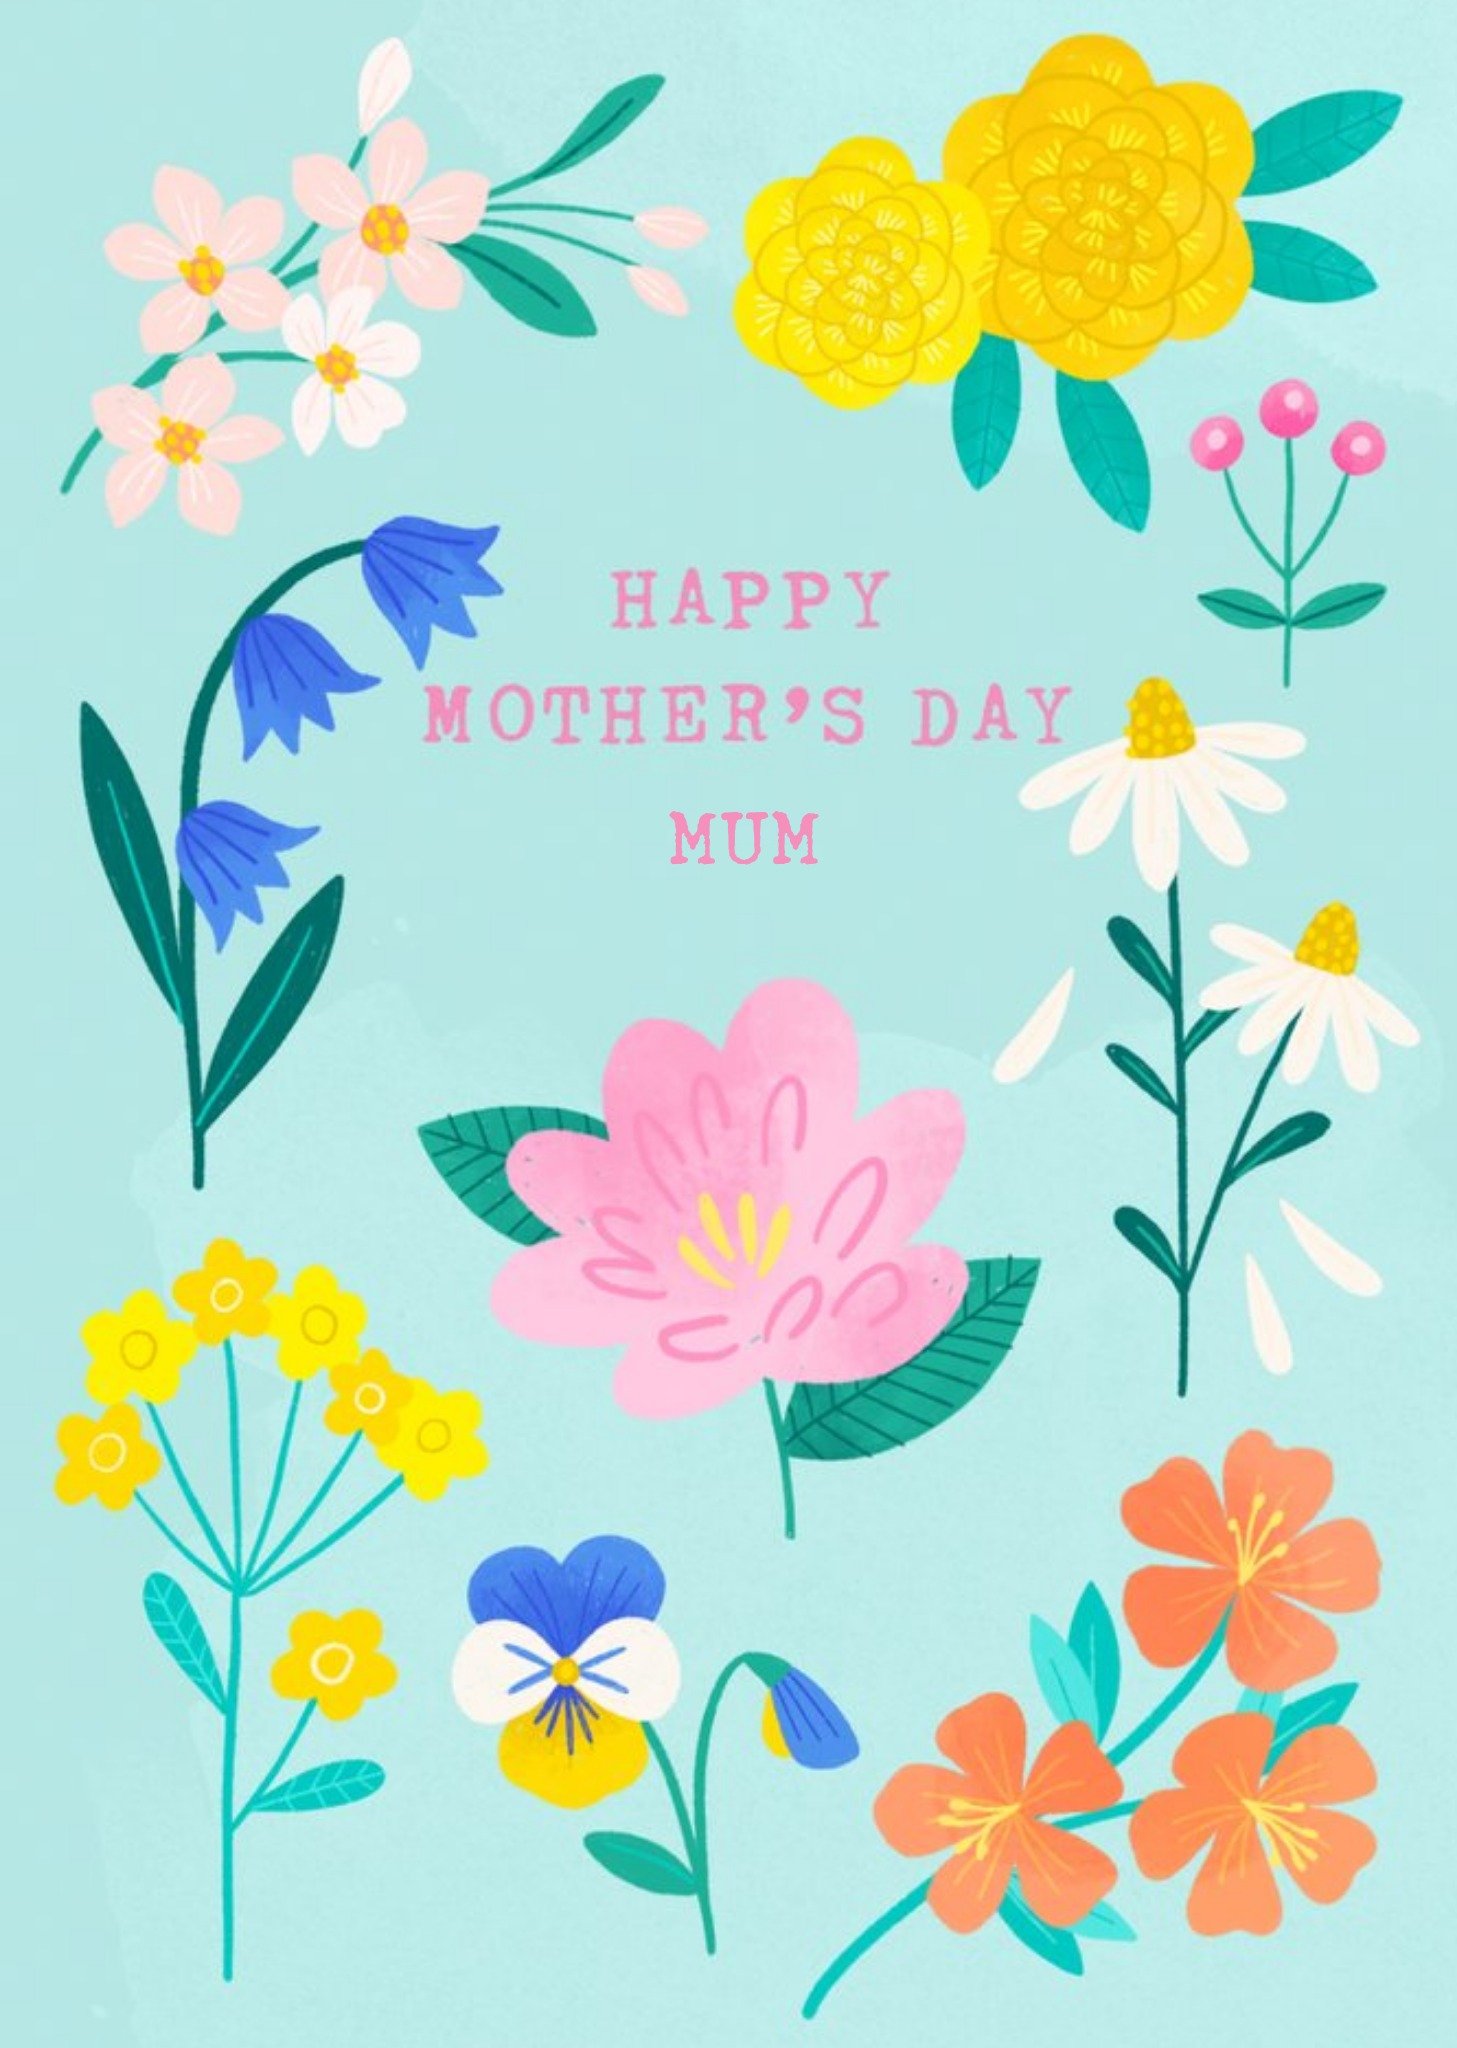 Moonpig Illustrated Bright Floral Happy Mother's Day Mum Card Ecard